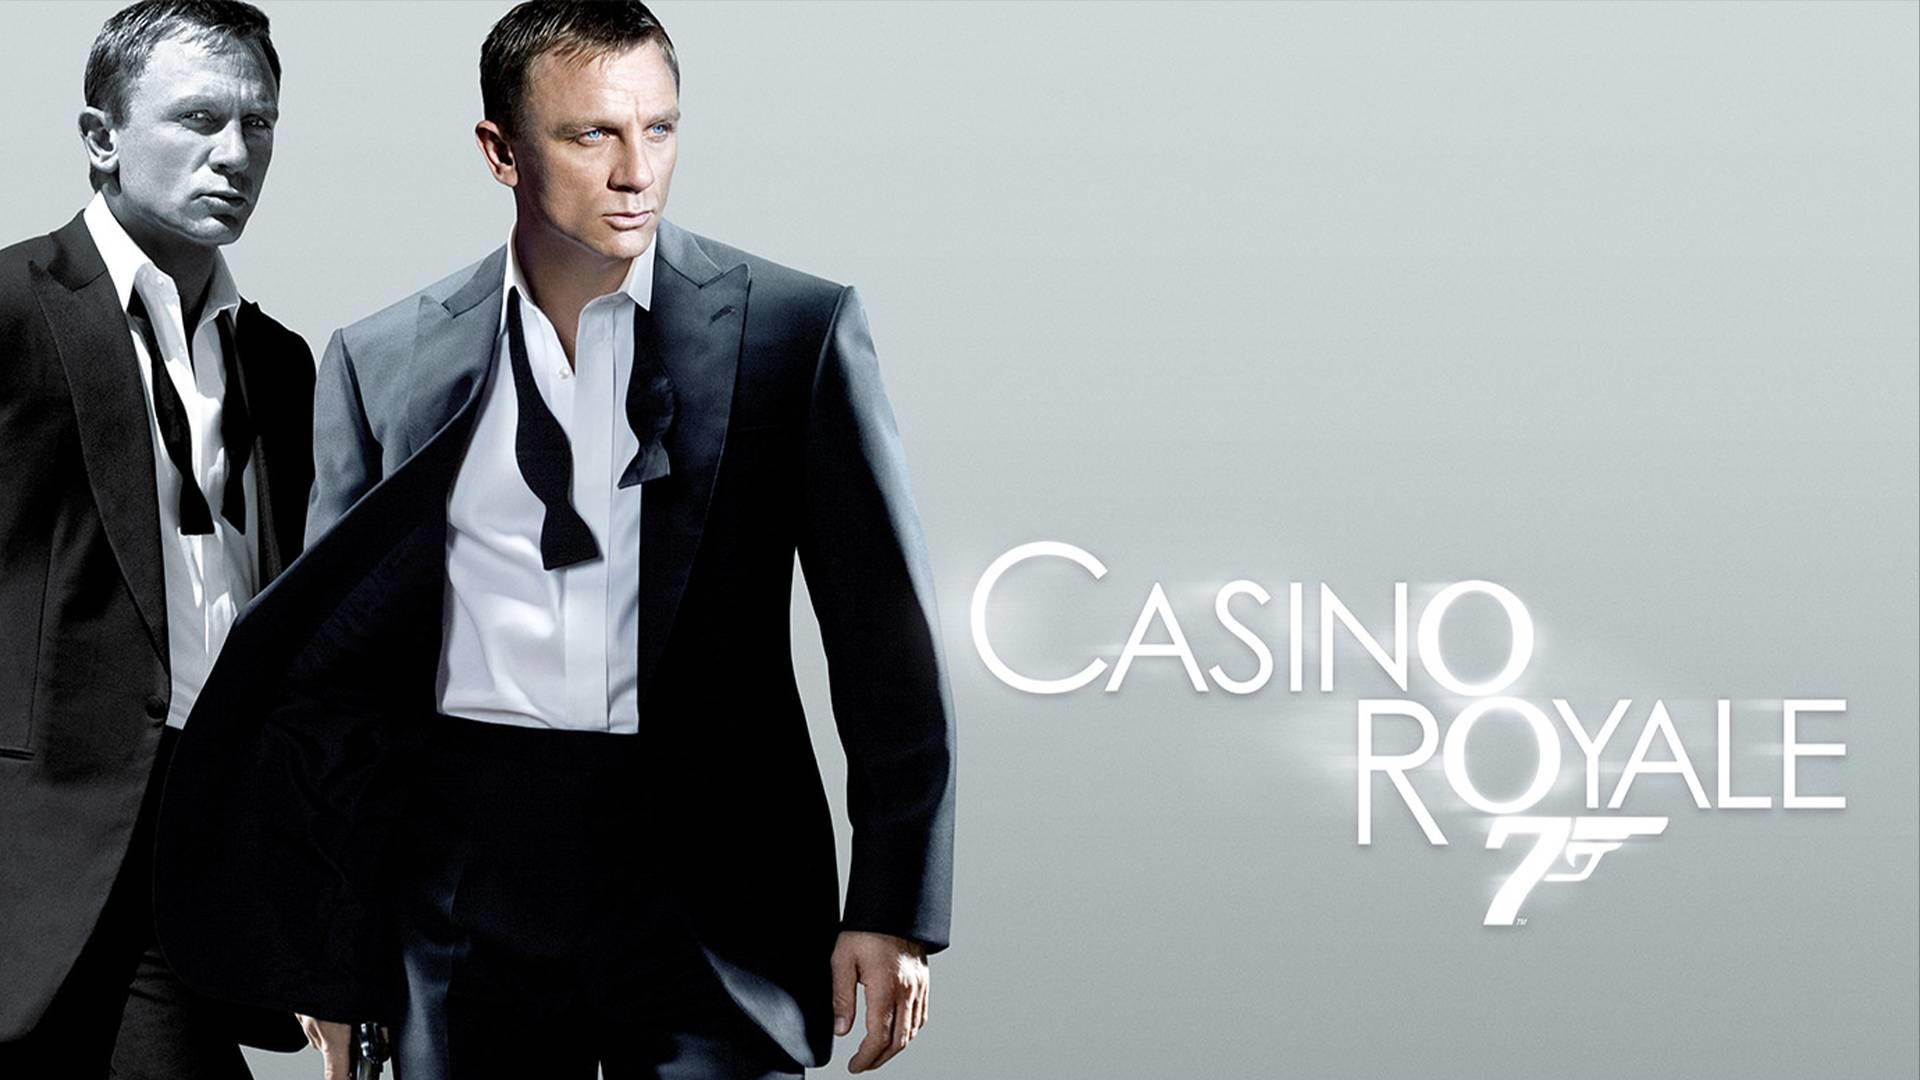 opening song casino royale